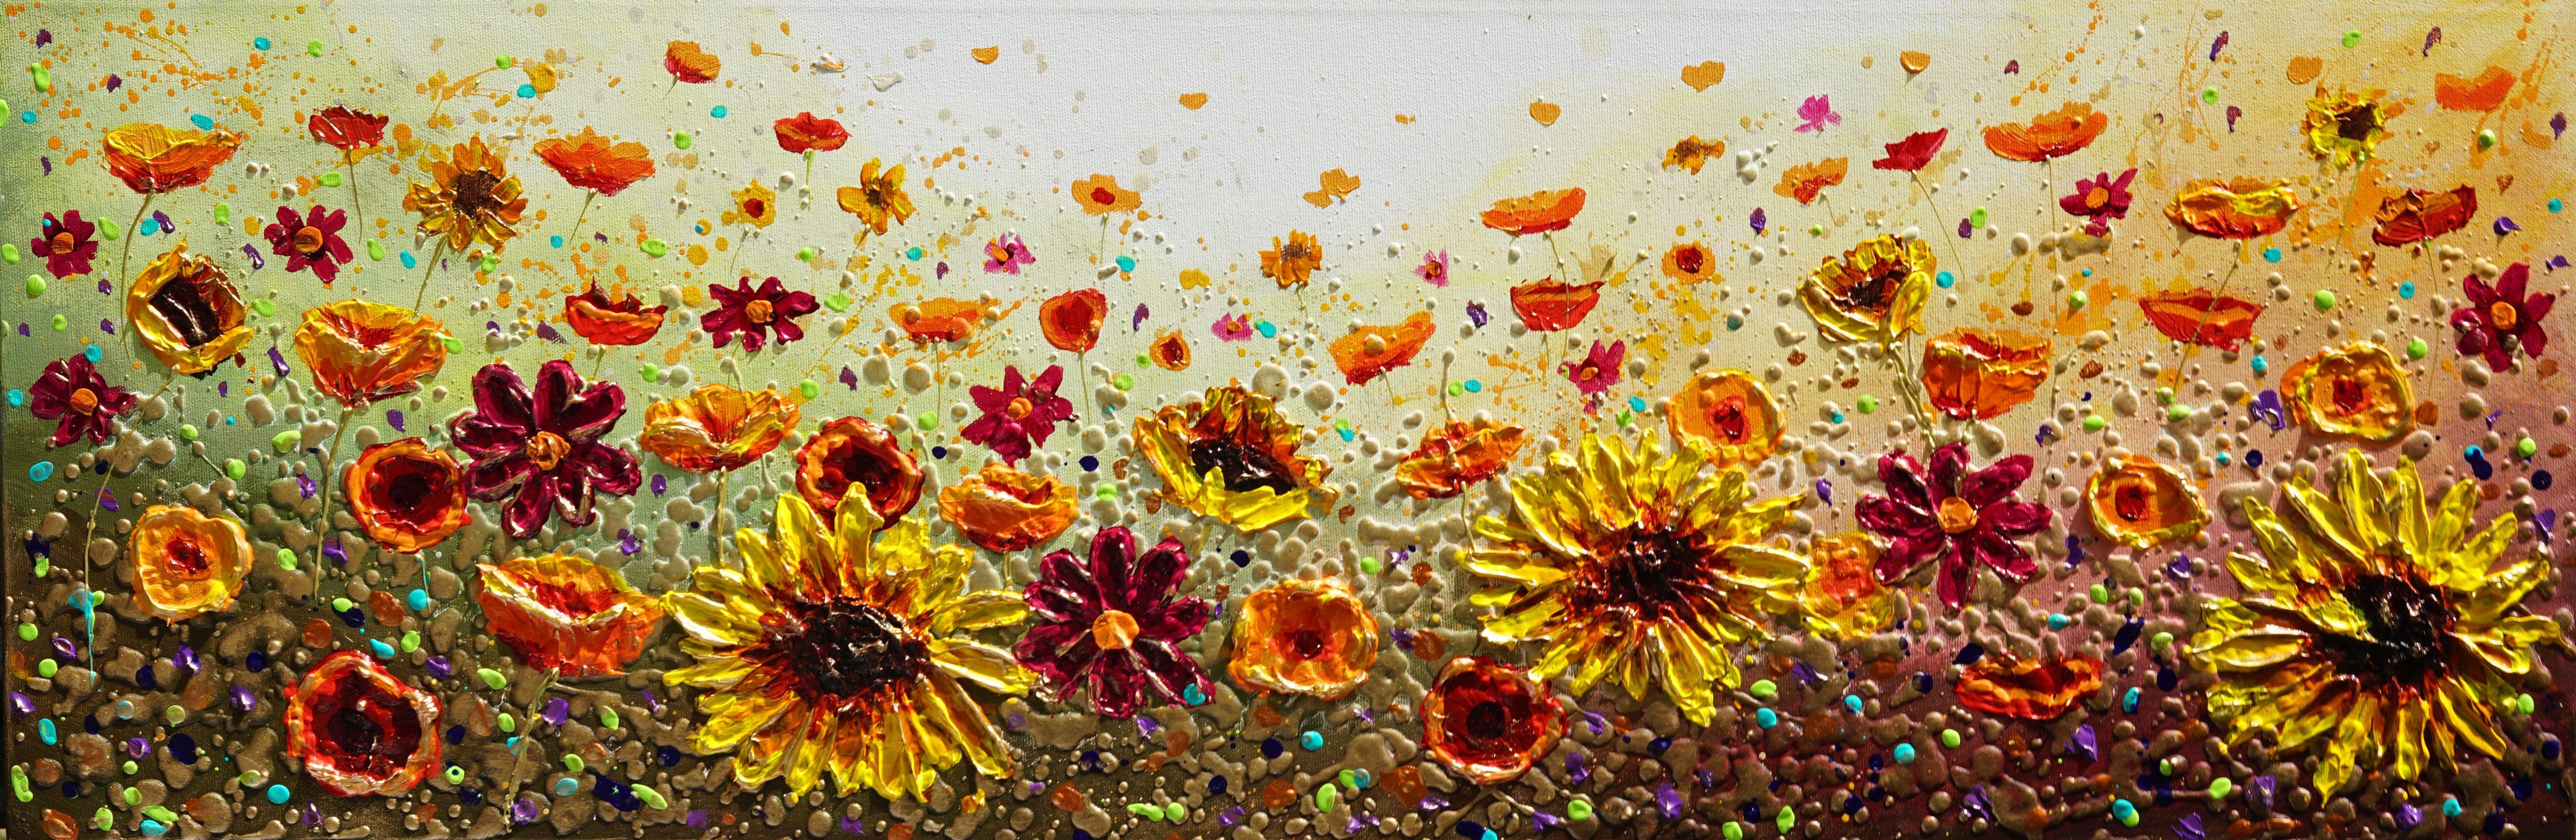 Original beautiful impasto textured painting on canvas of wildflowers including poppies and sunflowers. High-quality professional acrylic paints. Varnished for protection and longevity.  Painted on a deep edge canvas. The sides of the canvas are